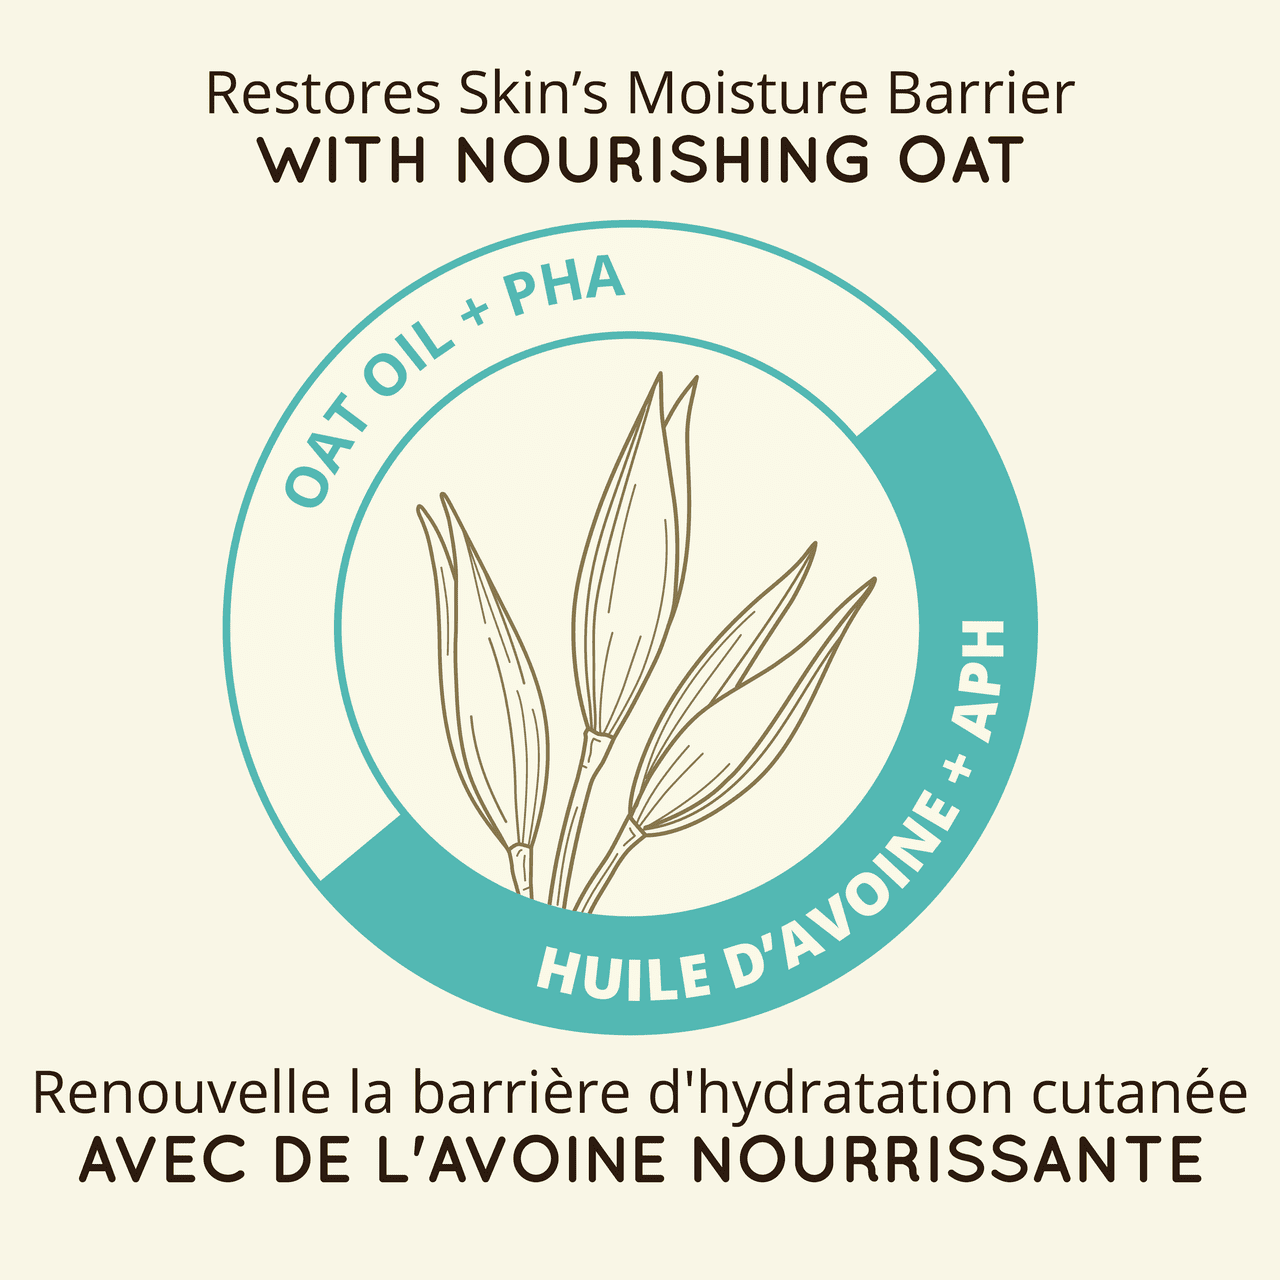 Text explaining that the product restores skin's moisture barrier with nourshing oat